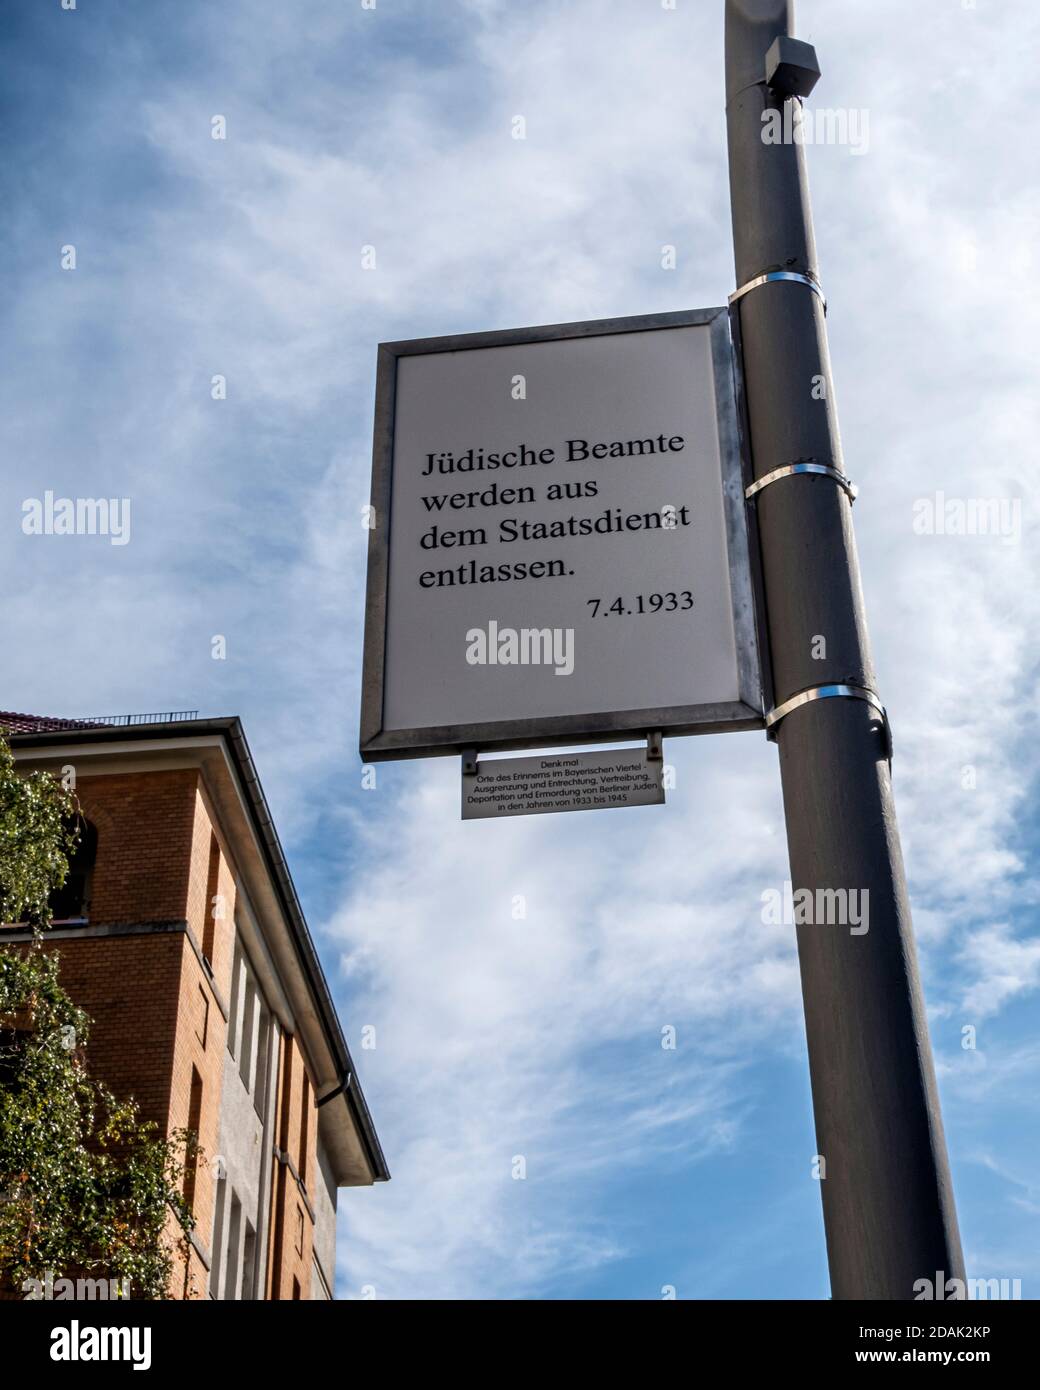 Berlin Schöneberg, Bavarian Quarter. Places of Remembrance memorial, One of 80 double-sided signs on lampposts depicting anti-Jewish Nazi rules. Stock Photo